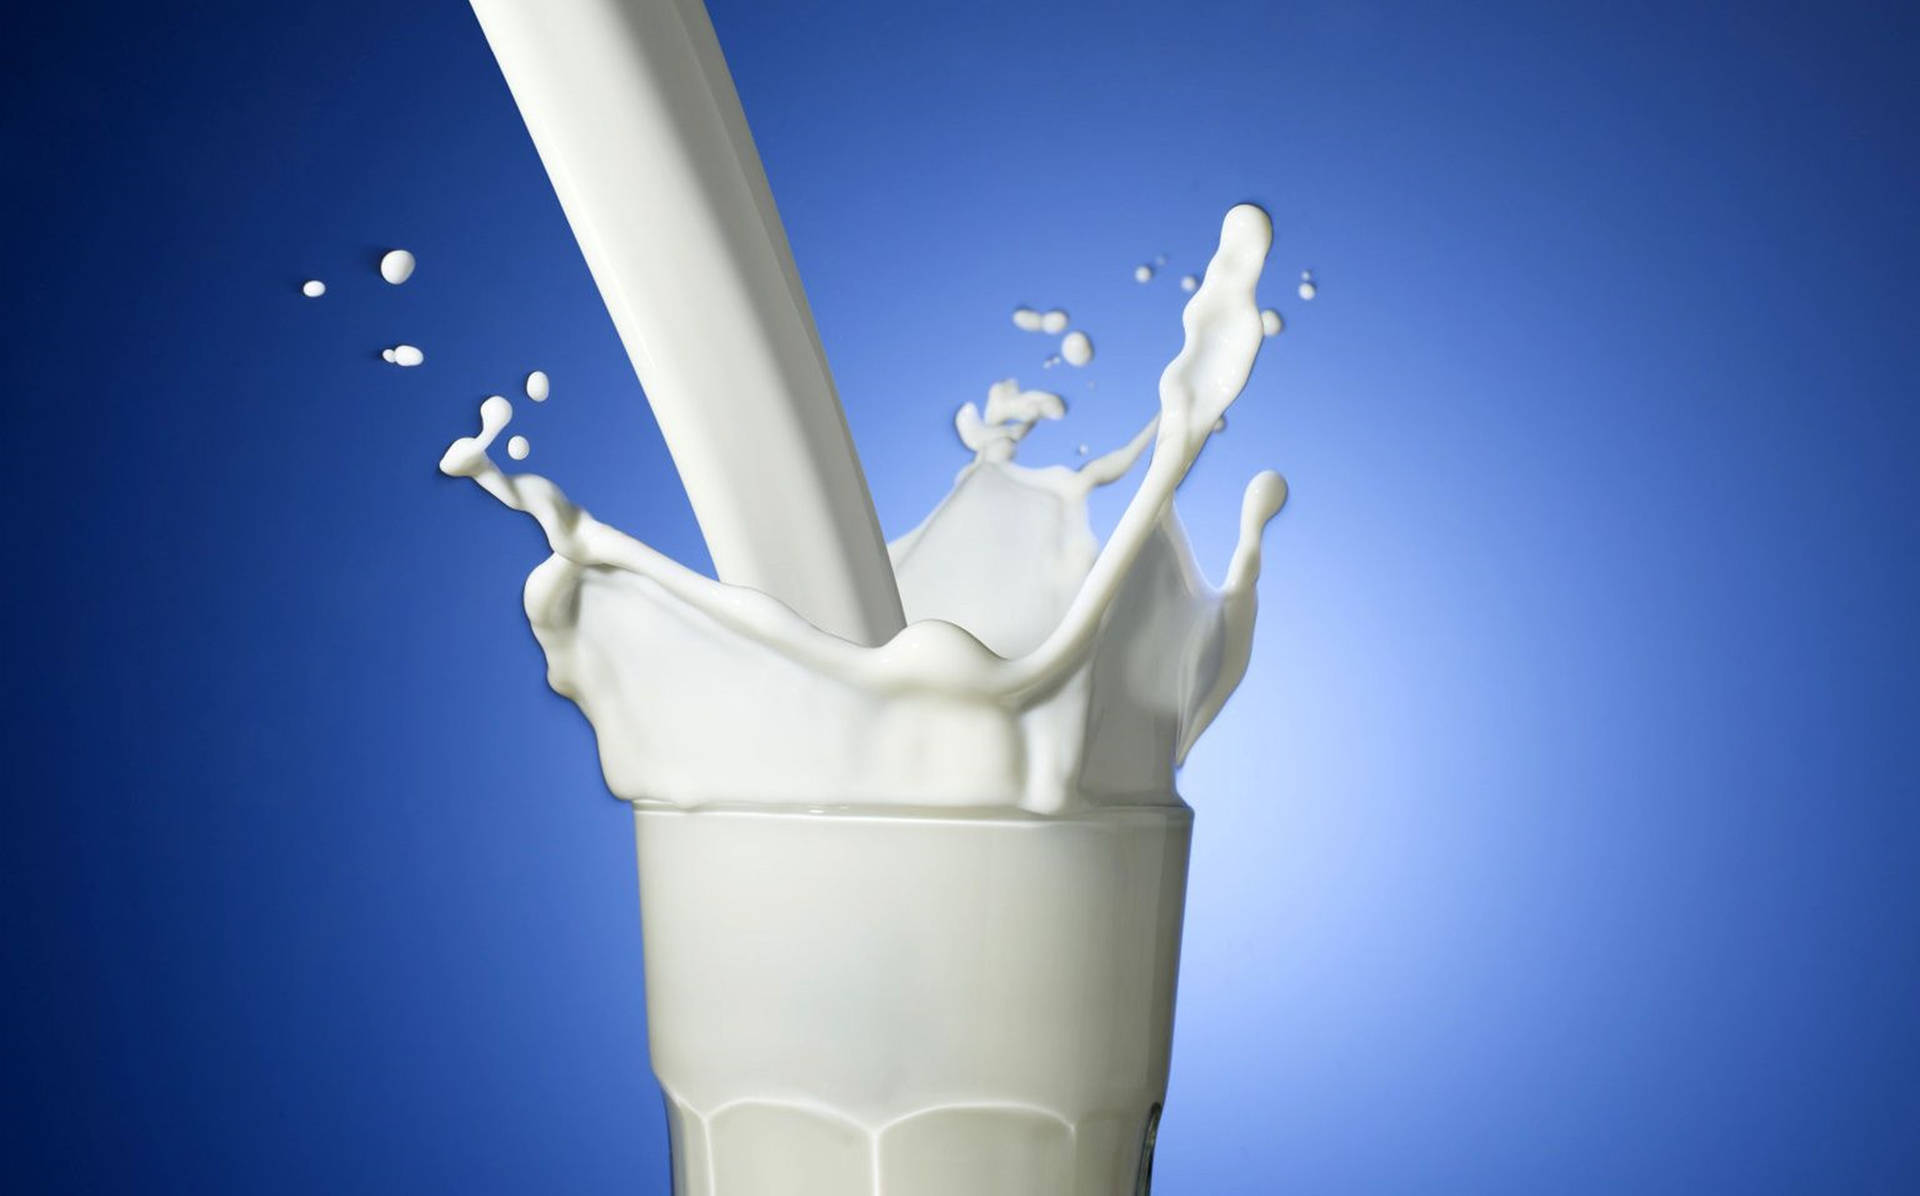 Share 154+ dairy wallpaper latest